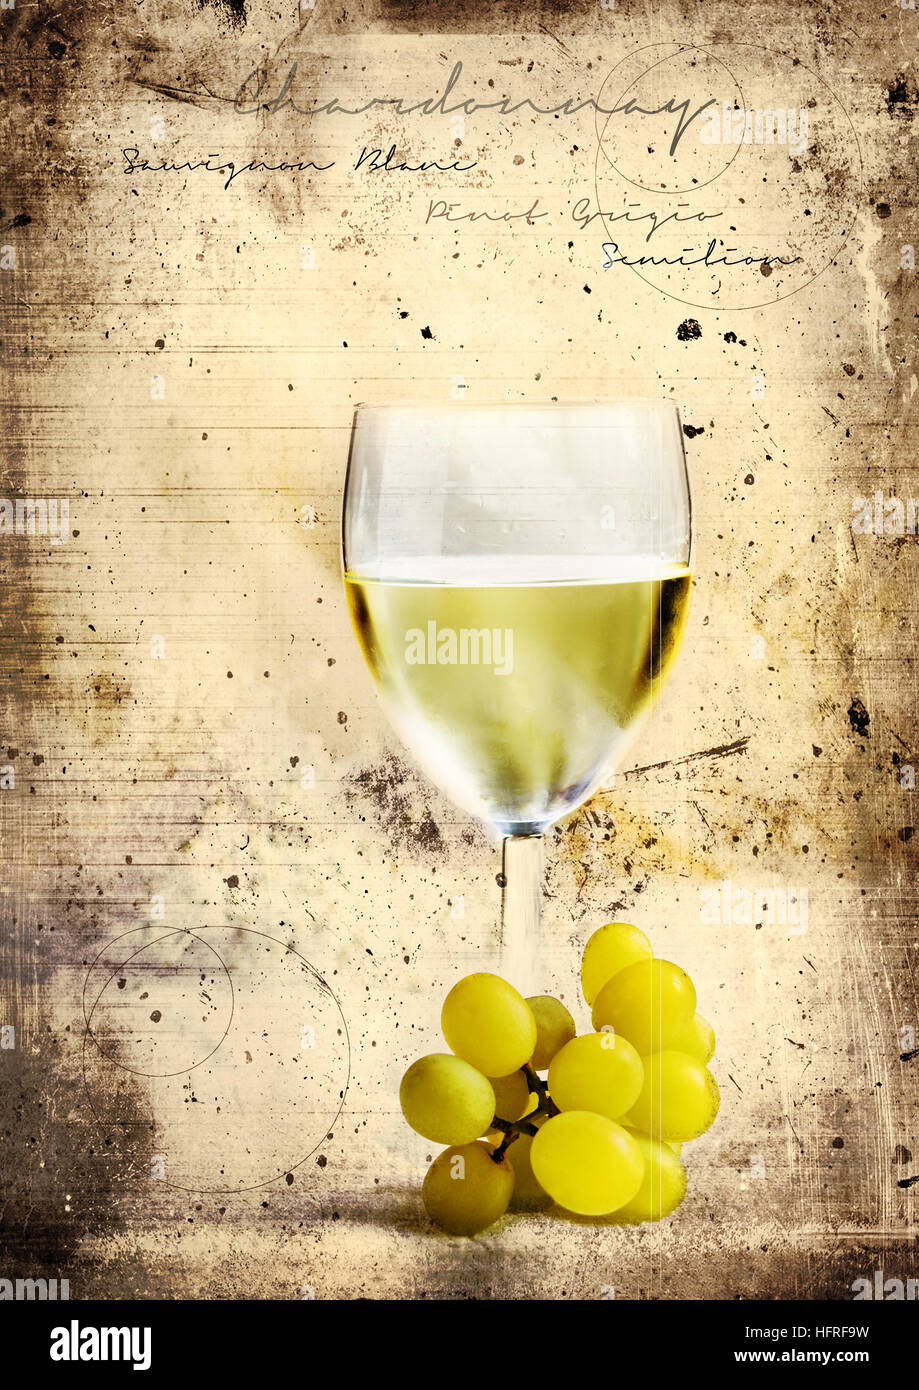 Grunge graffiti effect image of classic chilled French white wine ideal for your bistro or restaurant wall art or menu cover design art. Generous acco Stock Photo